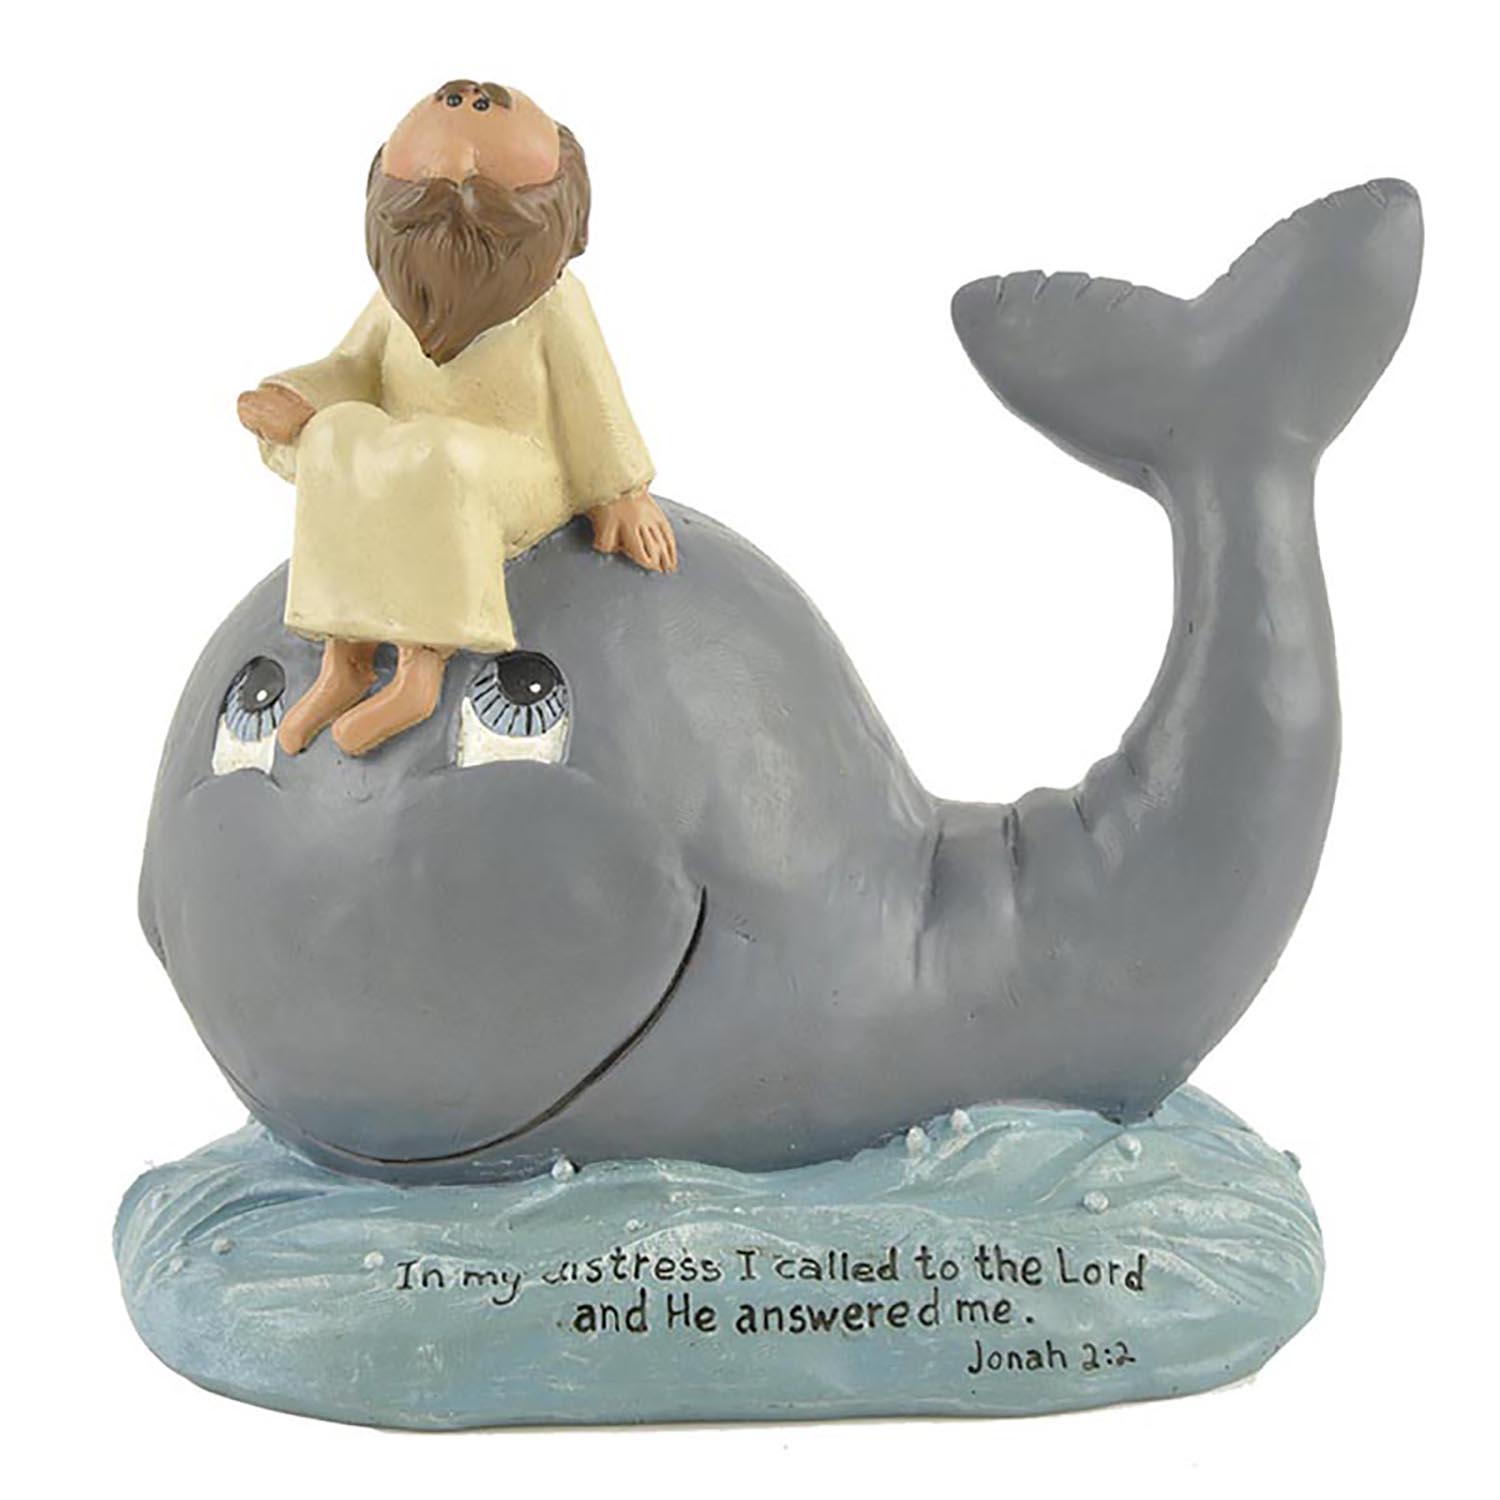 Faithful Journey: Jonah and the Whale Resin Figurine 'CALLED TO THE LORD' JONAH W/WHALE- A Symbol of Hope and Divine Answer1211-87513